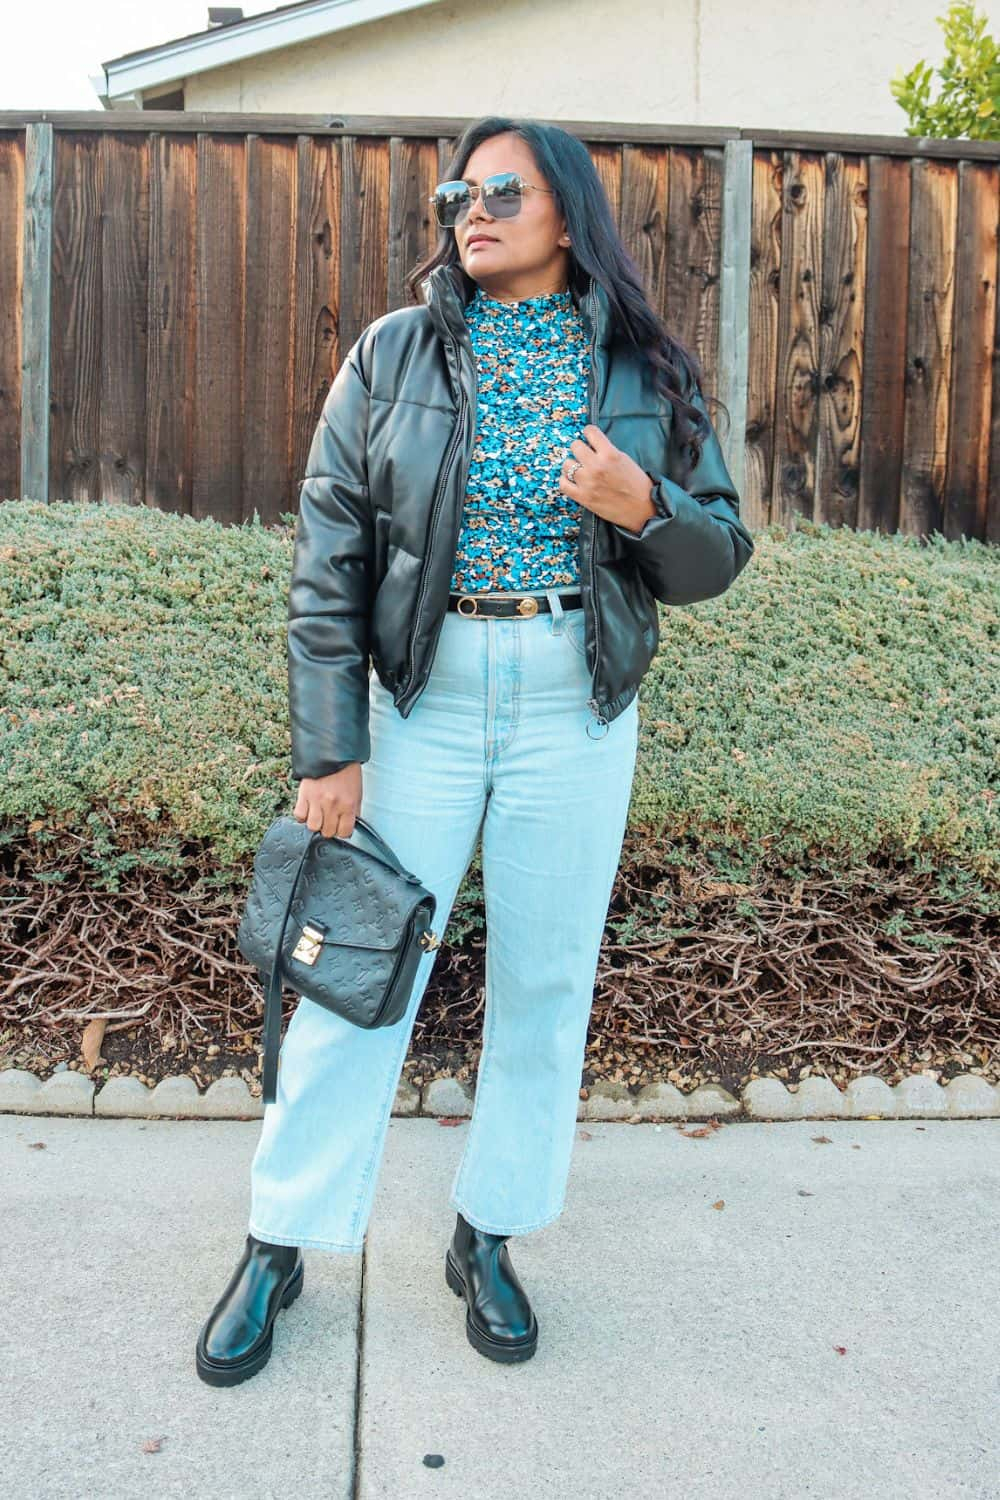 What To Wear With Straight Leg Jeans in Winter - Tops & Layering Ideas